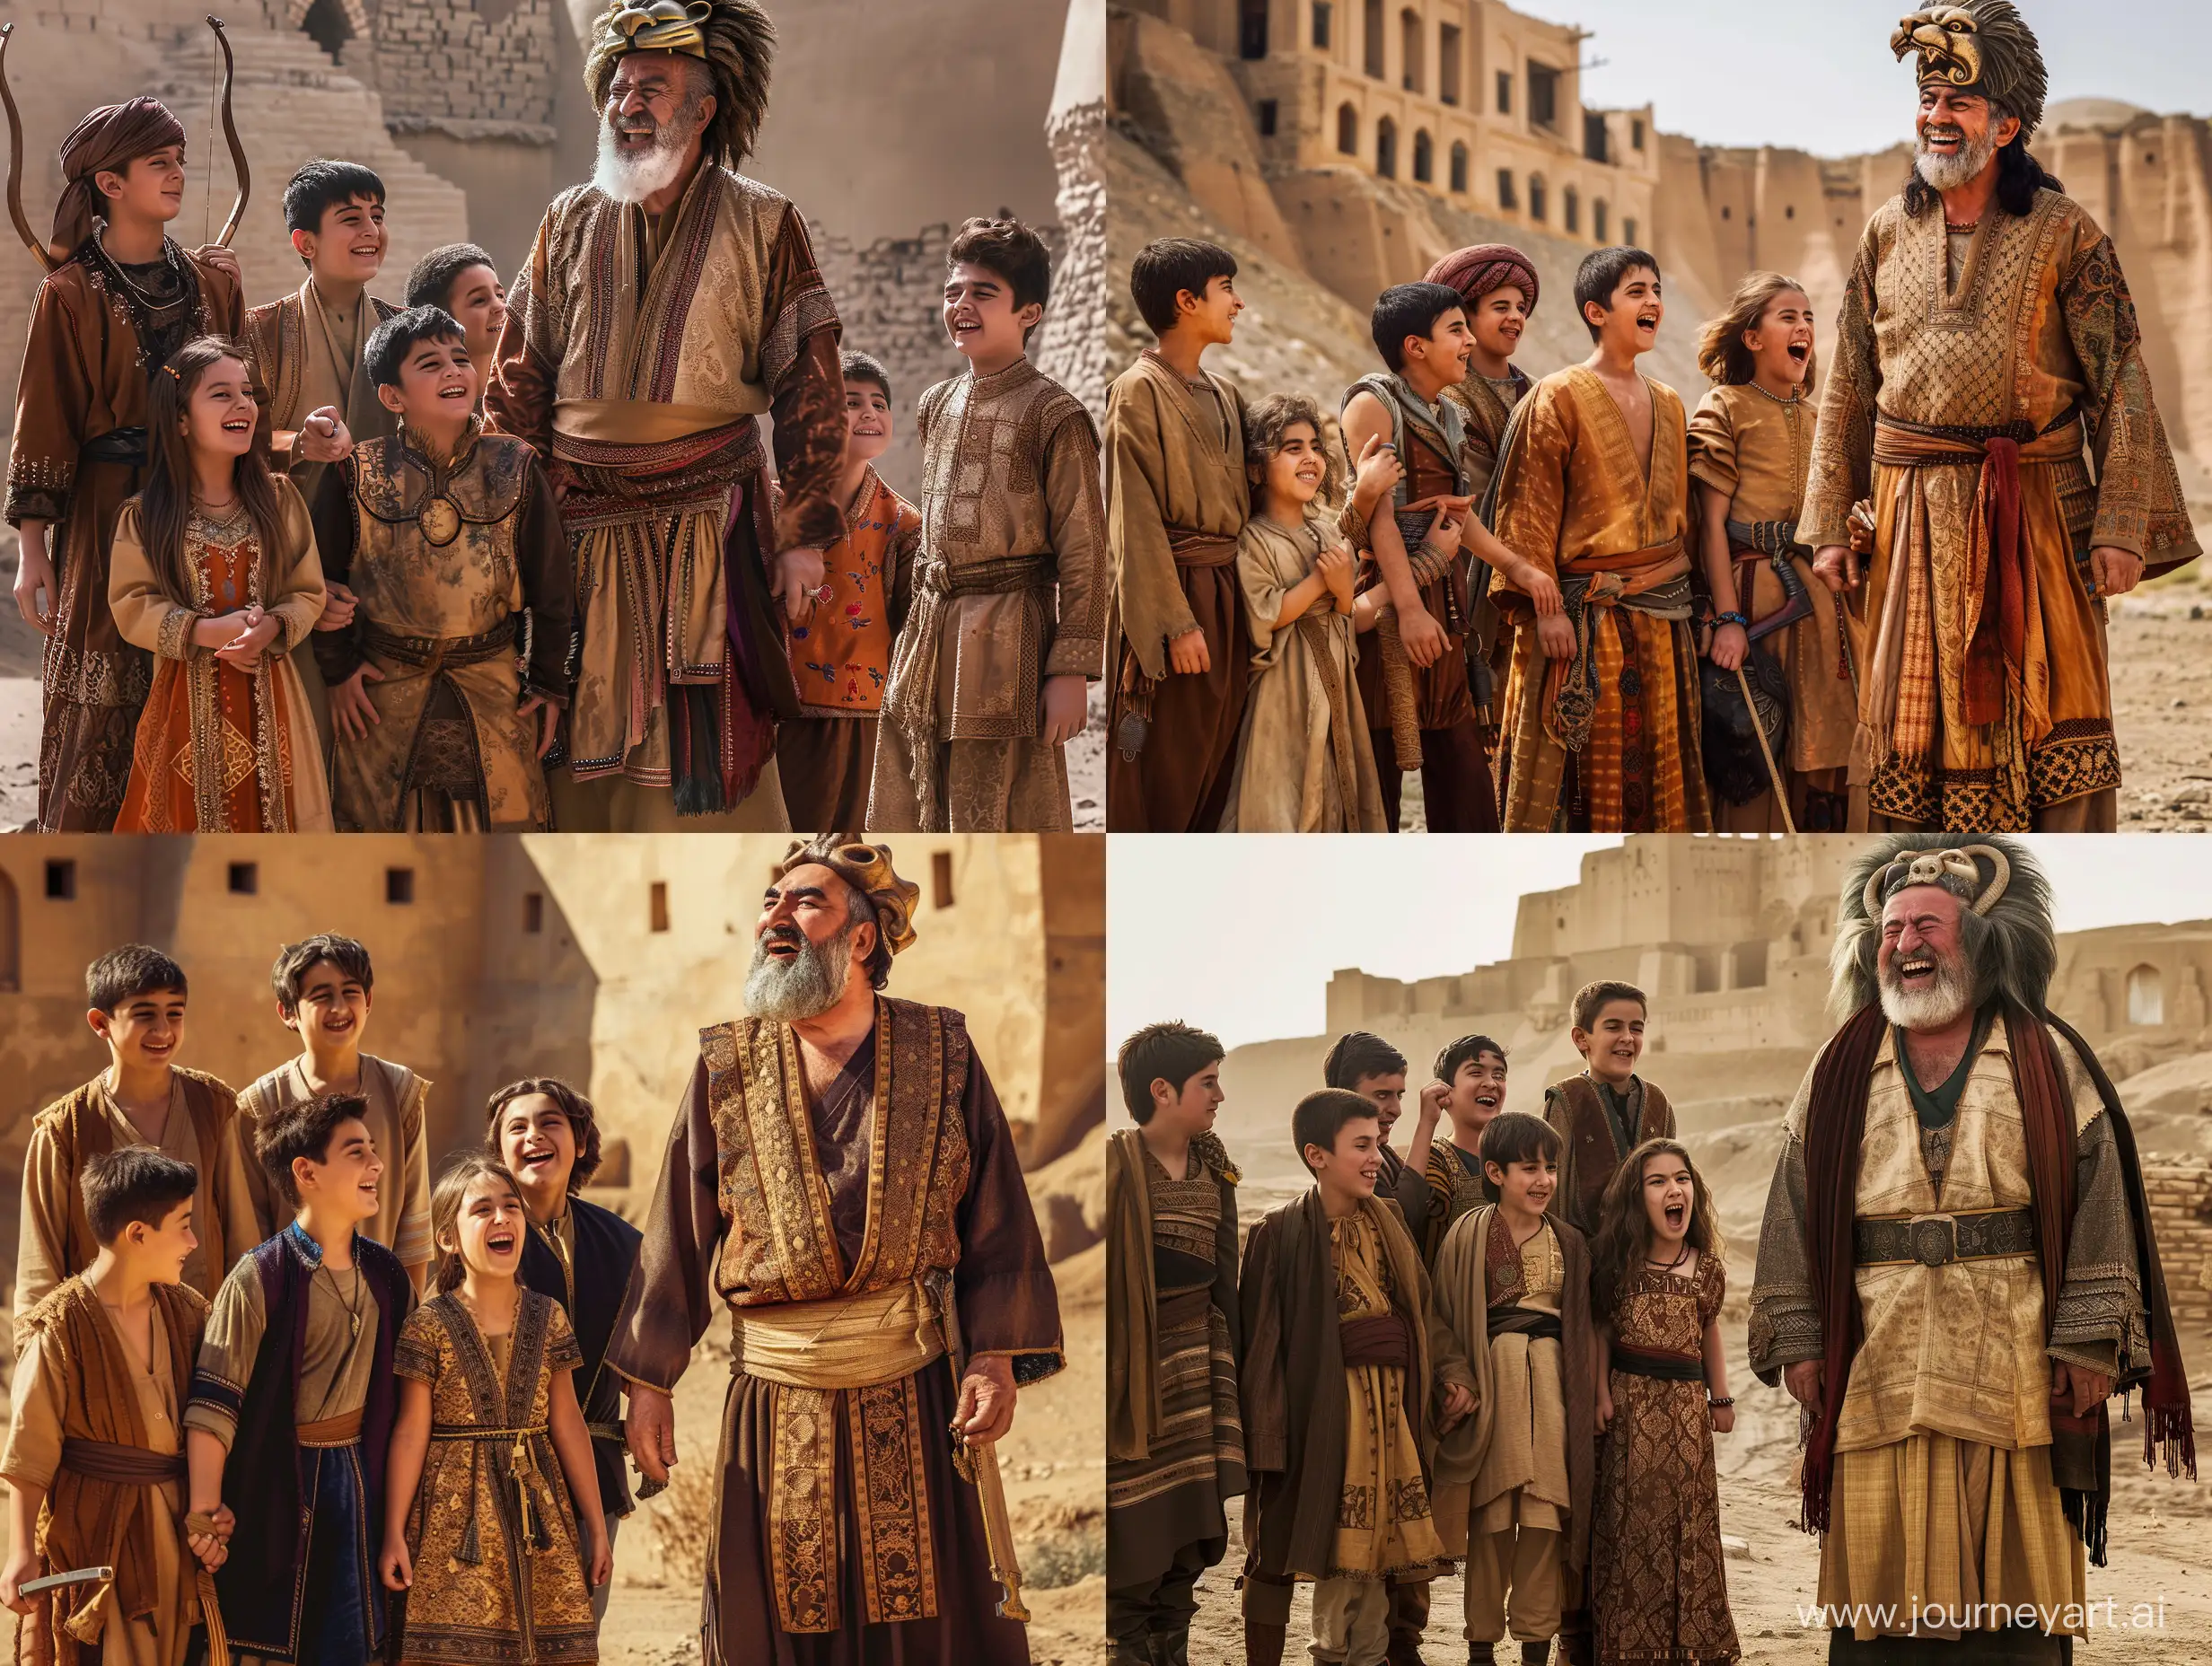 A father is standing in traditional Persian clothes, who wears a lion's head like a hat, and looks like he is 55 years old the has seven sons and a daughter. Some of his sons three of them, aged 30, 35 and 32, are standing on right of him. The 35-year-old son is wearing ancient blacksmith clothes.  He is laughing, the 32-year-old boy has a bow and wears an archery dress, and the 30-year-old boy wears an ancient Persian martial dress. the others one and daugher are on the left of him,  4 sons, one is 31 years old with a beautiful Persian dress, one is 33 years old with a traditional dress, and the other is 34 years old who also wears traditional clothes and a 29-year-old boy in normal clothes holding the hand of his 18-year-old sister who wears traditional Persian clothes, all of them are in the Bam Citadel of Kerman in the Persian Empire. in a desert, in an ancient civilization, cinematic, epic realism,8K, highly detailed, low angle photograph, backlit